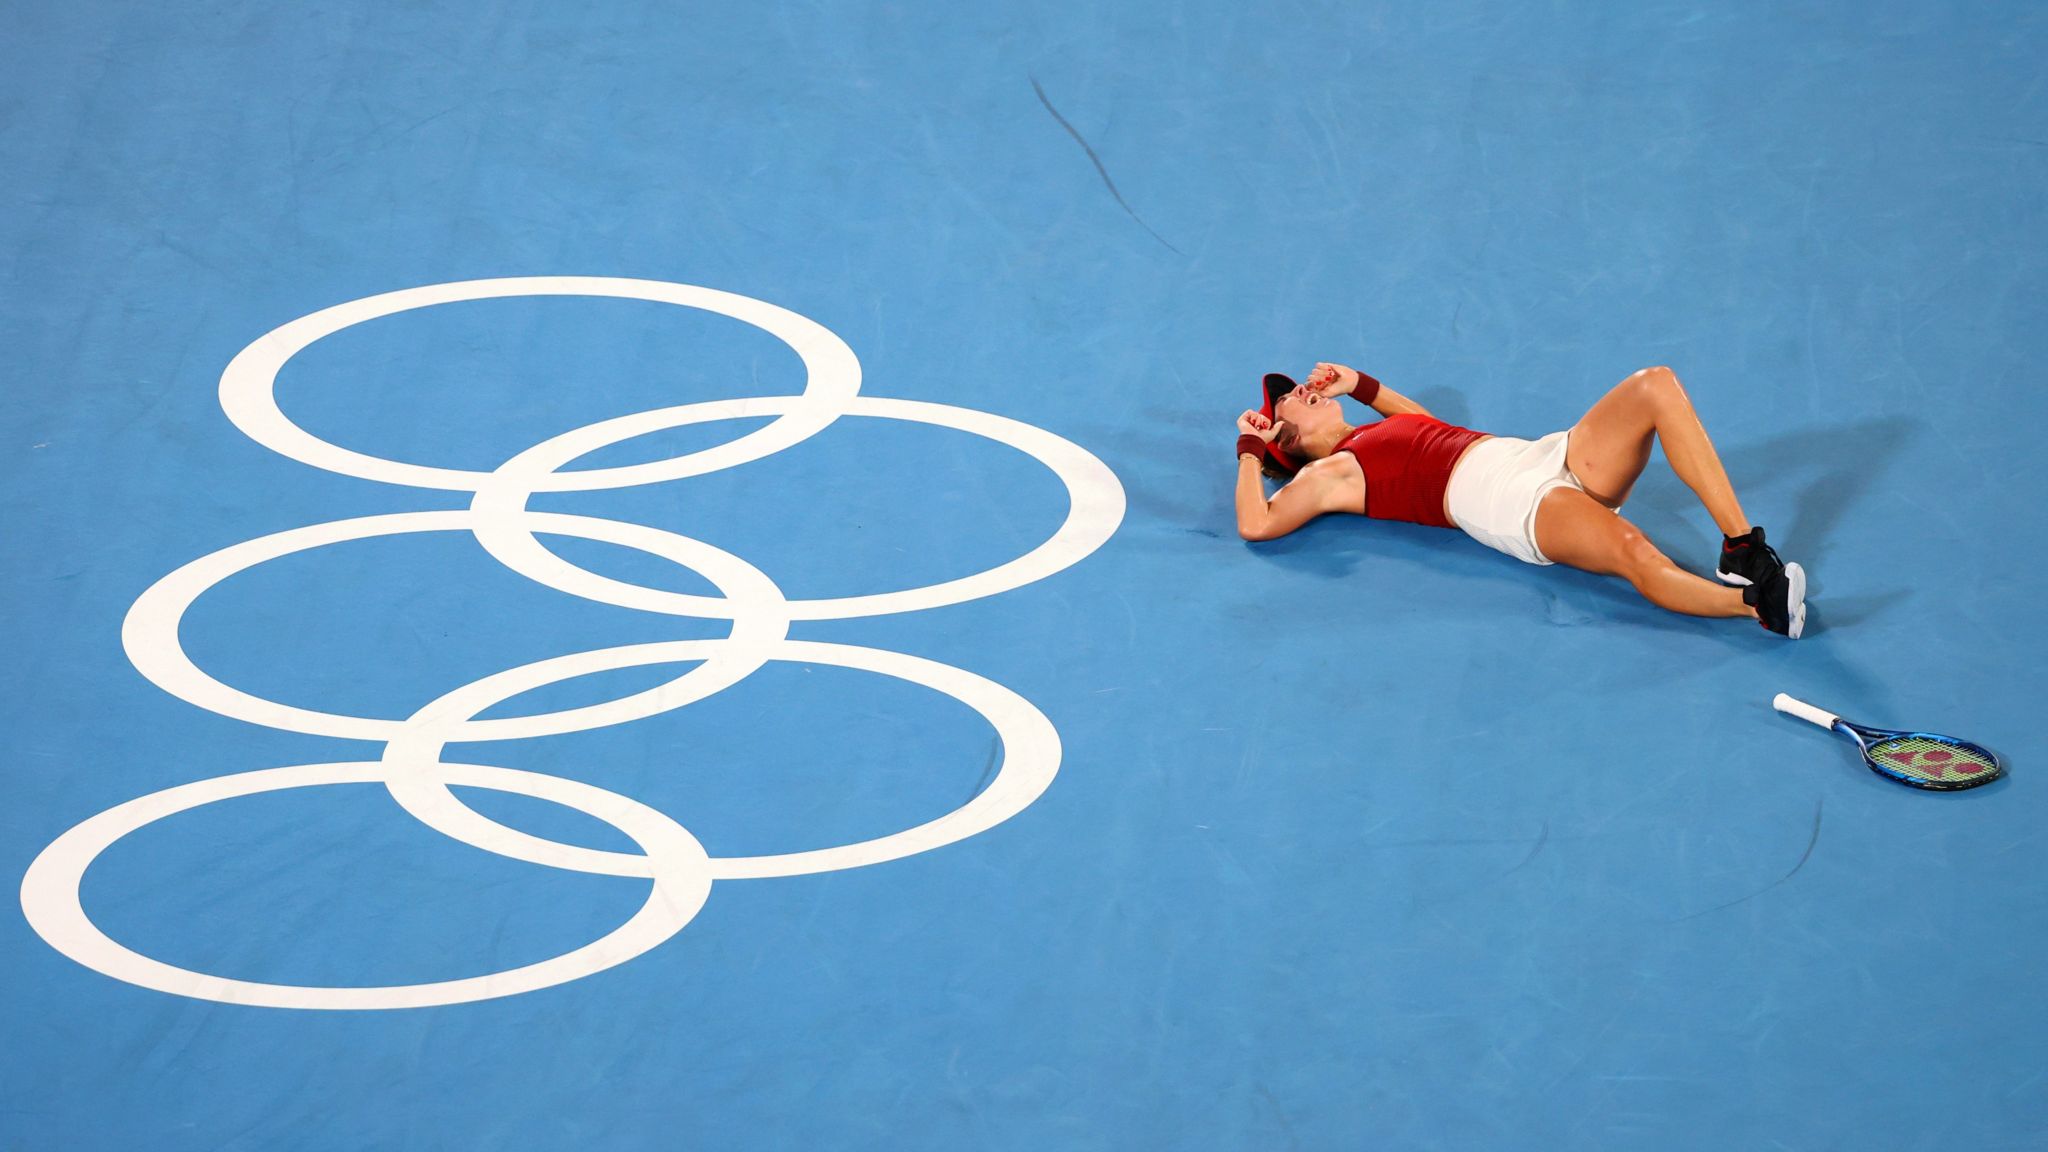 Olympic Tennis: History and Future